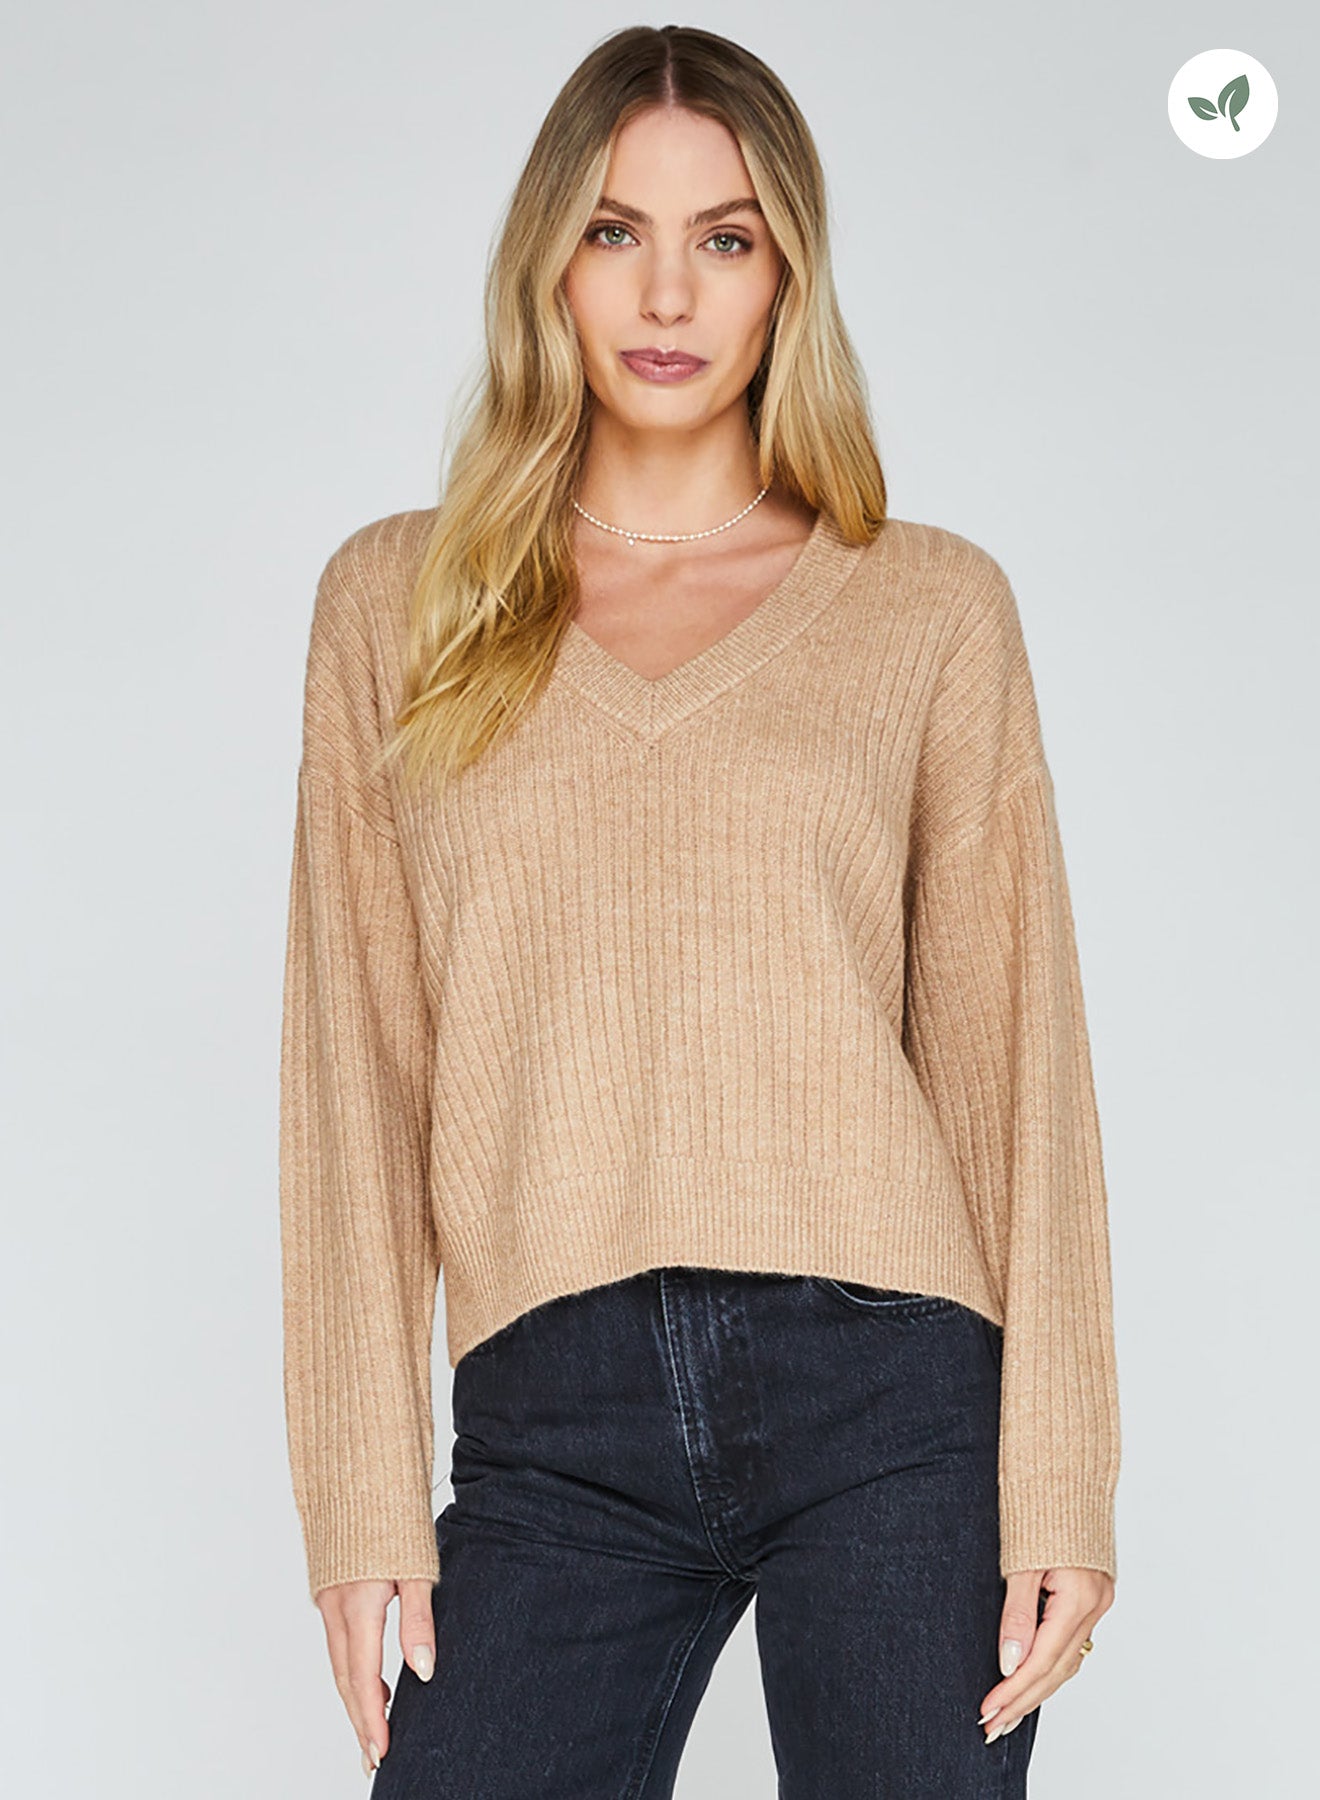 Woman wearing a tan boxy v-neck pullover sweater.